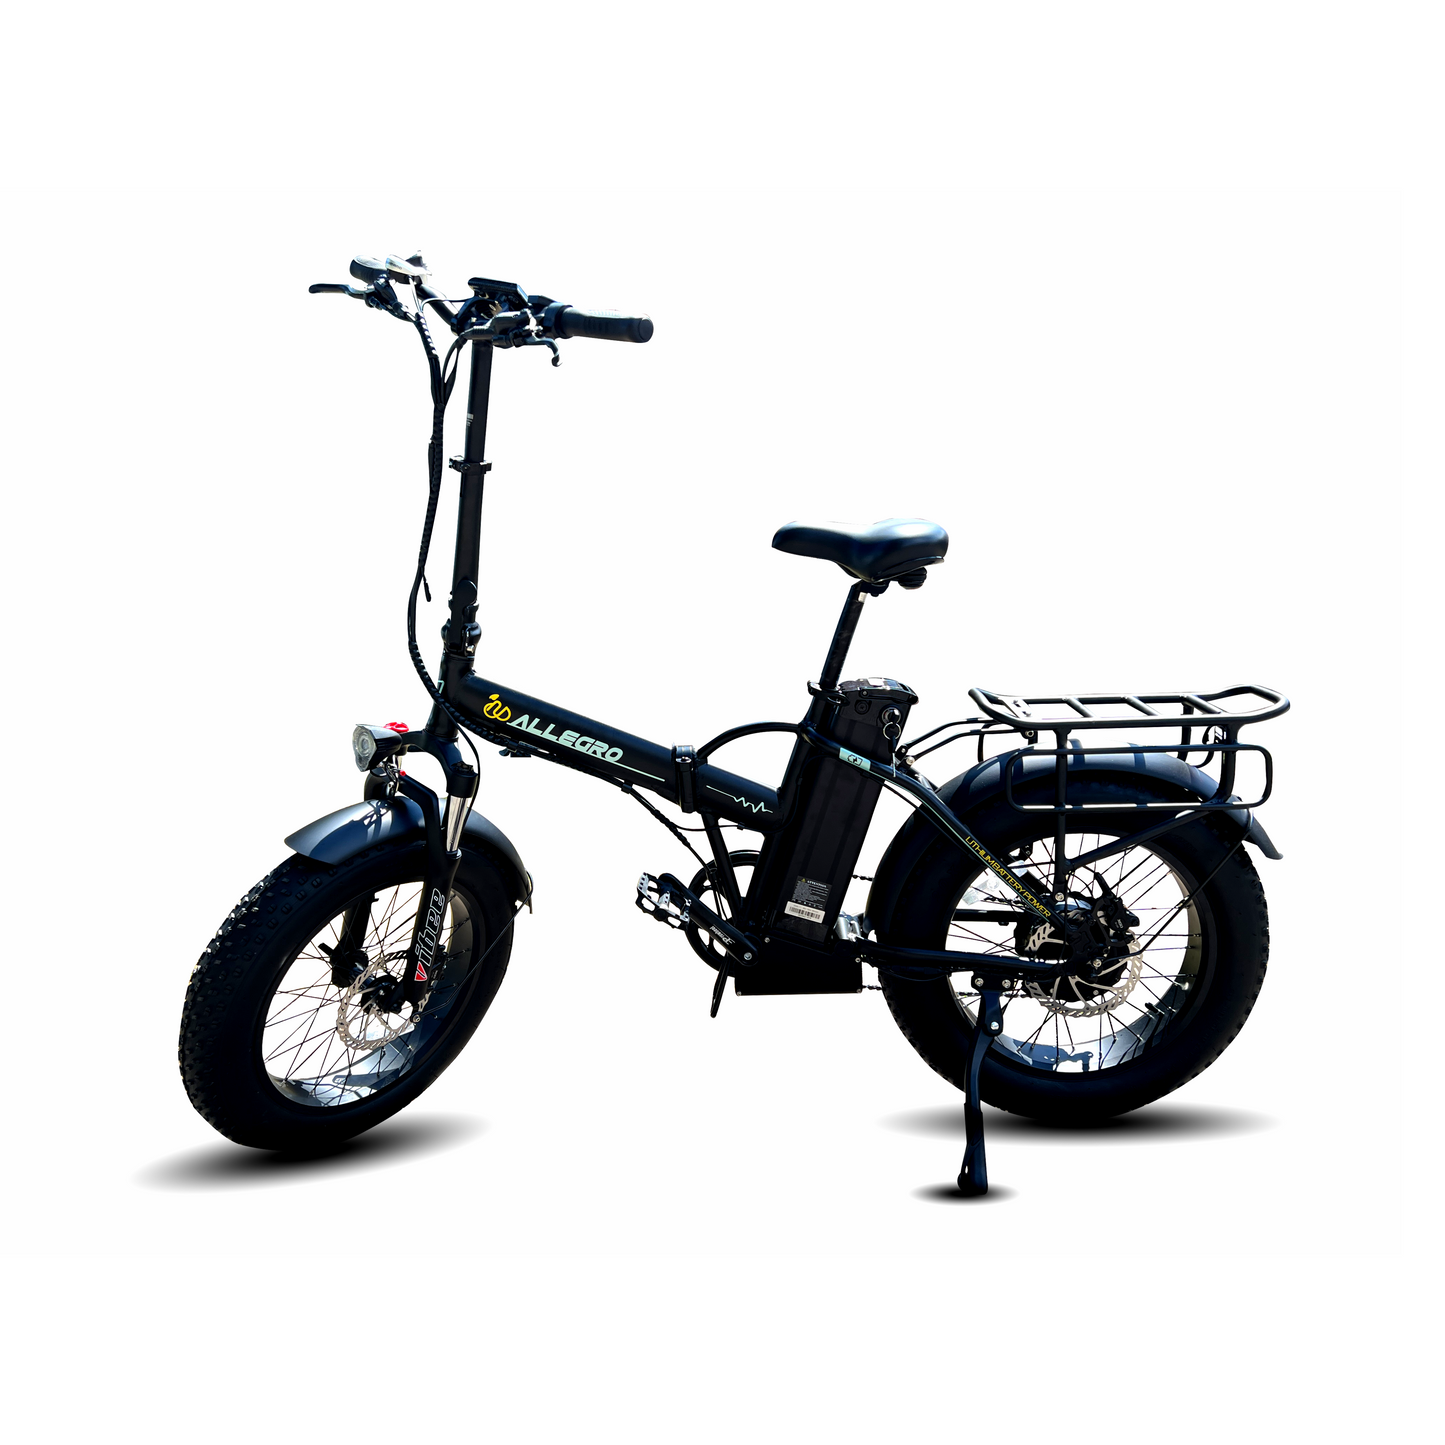 Side perspective of Allegro Electric Bike showing off its sleek black finish